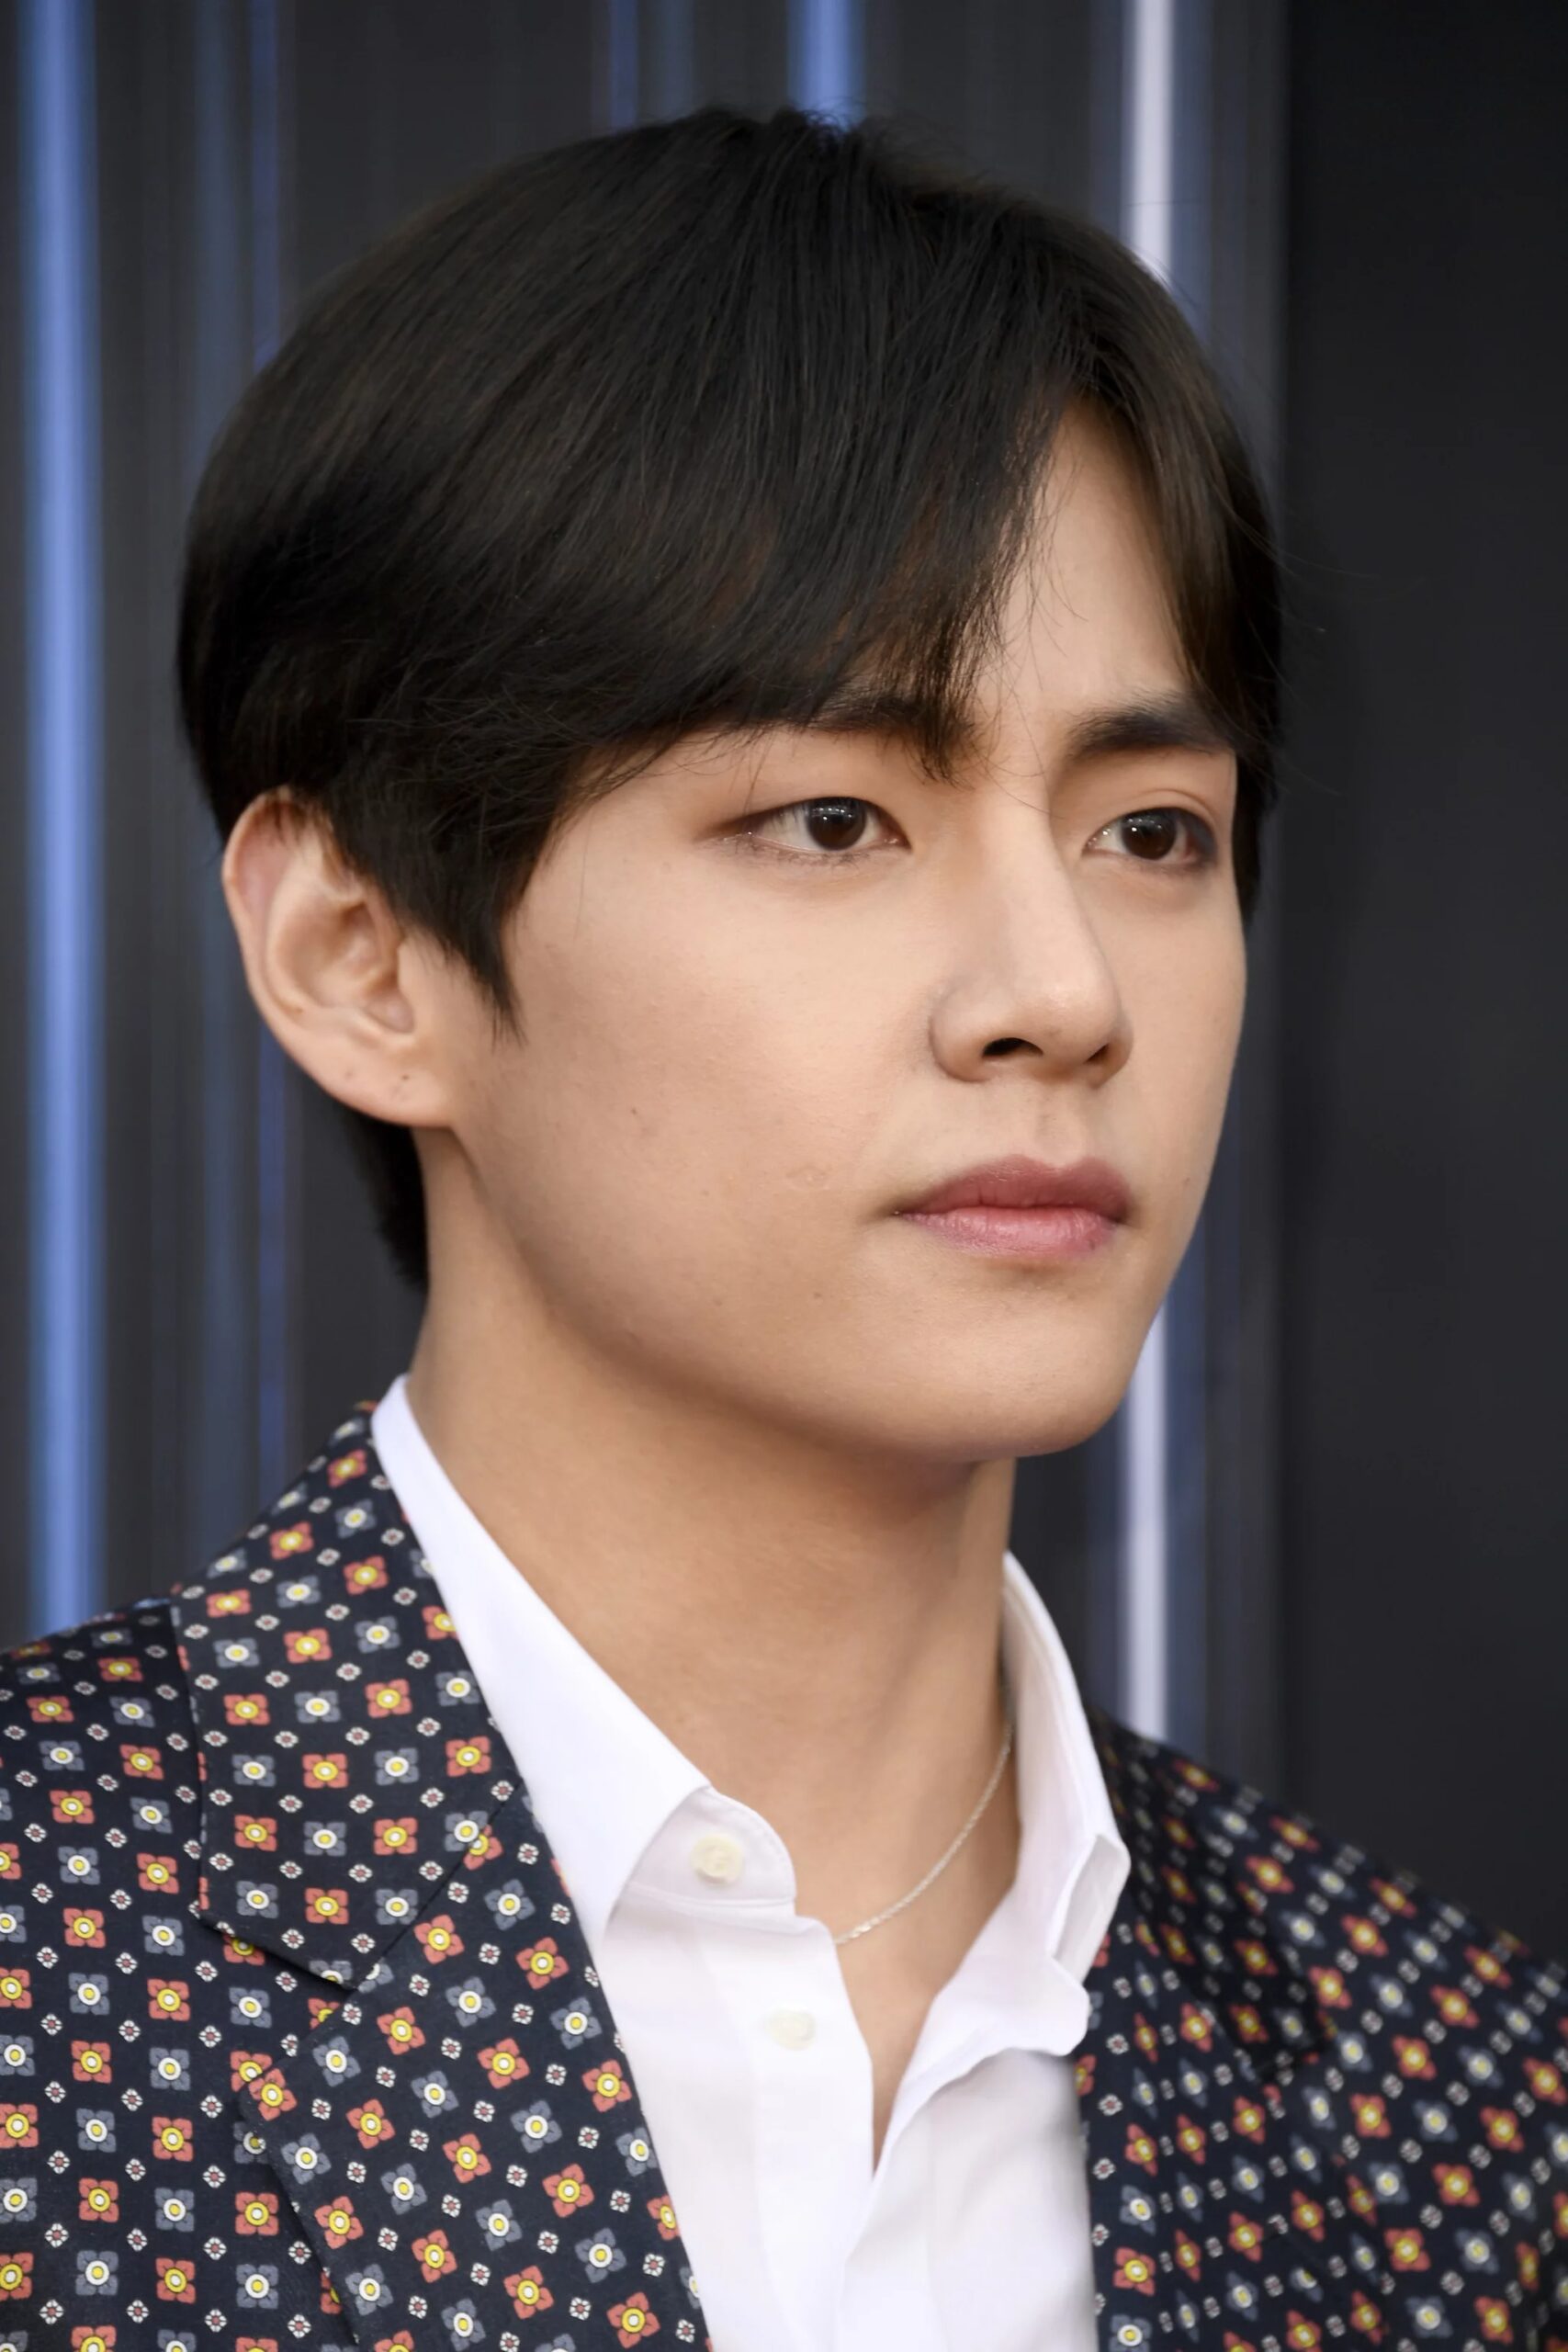 Most Popular Celebrities in the World- Kim Taehyung